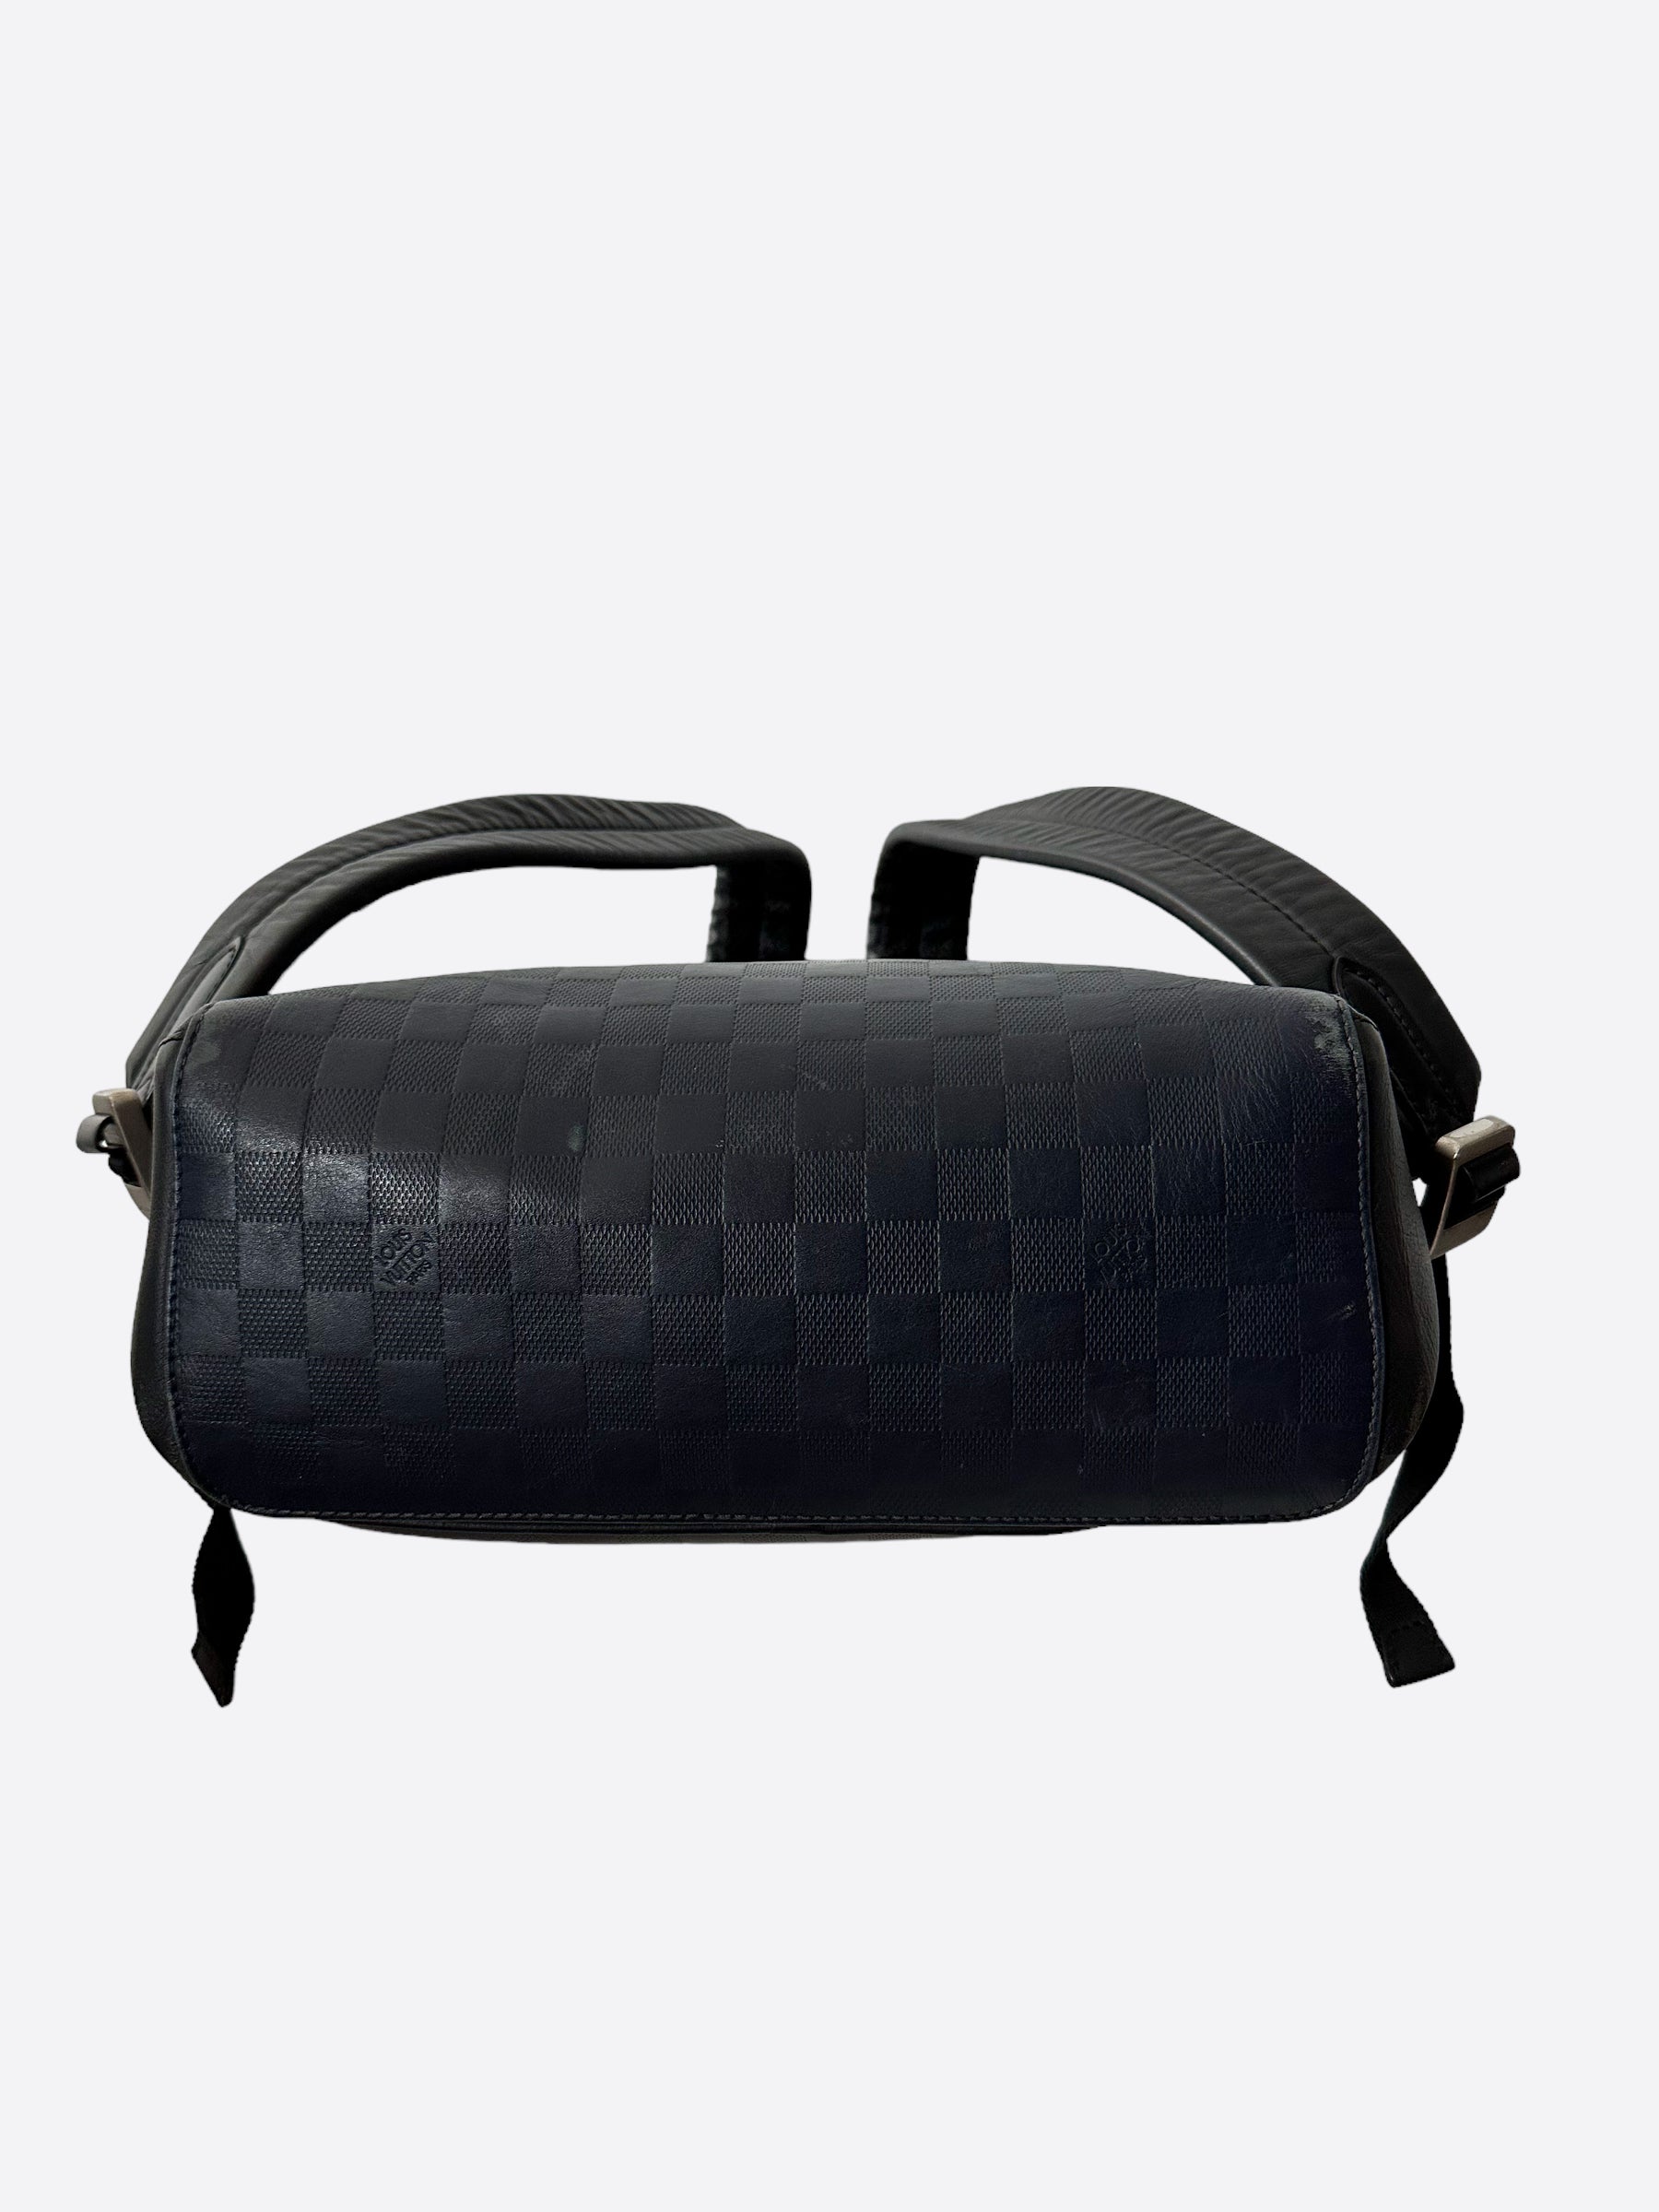 Louis Vuitton Blue Damier Infini Campus Backpack – Savonches